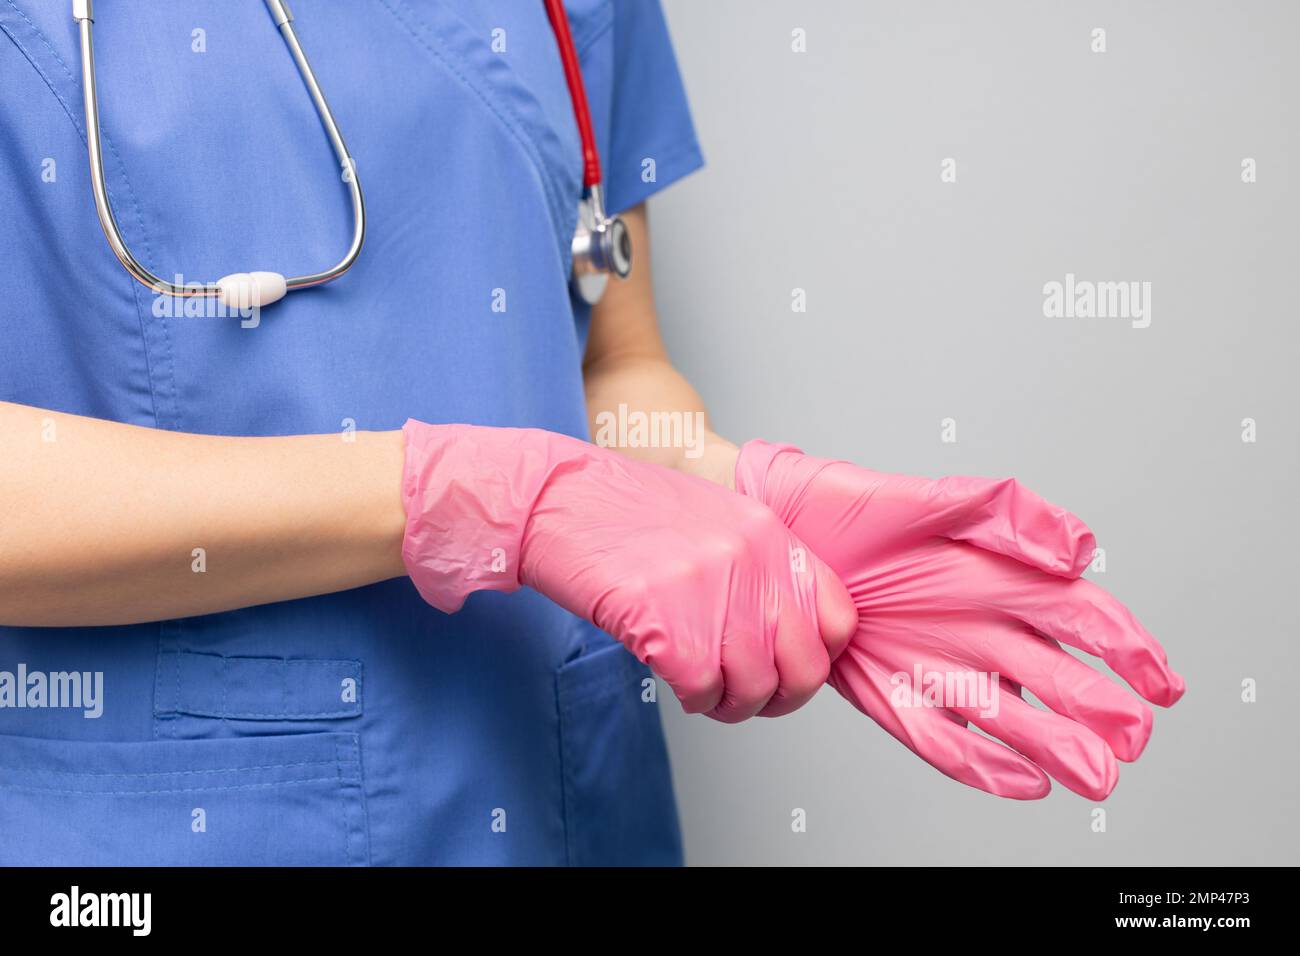 doctor in the hospital puts on a glove. doctor wear gloves. doctor puts on rubber gloves. doctor getting ready for work Stock Photo